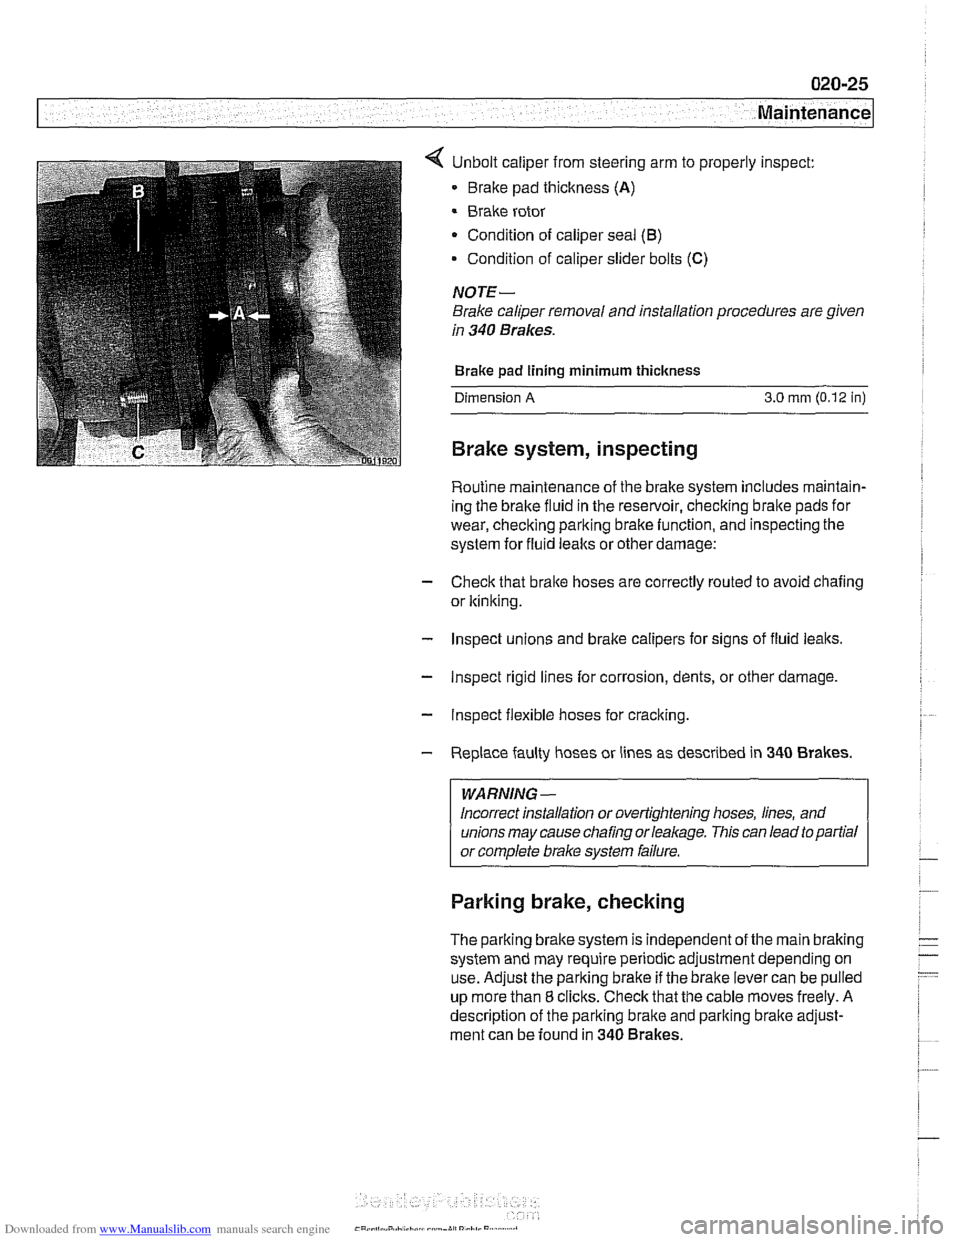 BMW 540i 1997 E39 Workshop Manual Downloaded from www.Manualslib.com manuals search engine 
7 Maintenance 
< Unbolt caliper from steering arm  to properly  inspect: 
Brake  pad thickness 
(A) 
Brake rotor 
Condition  of caliper seal 
